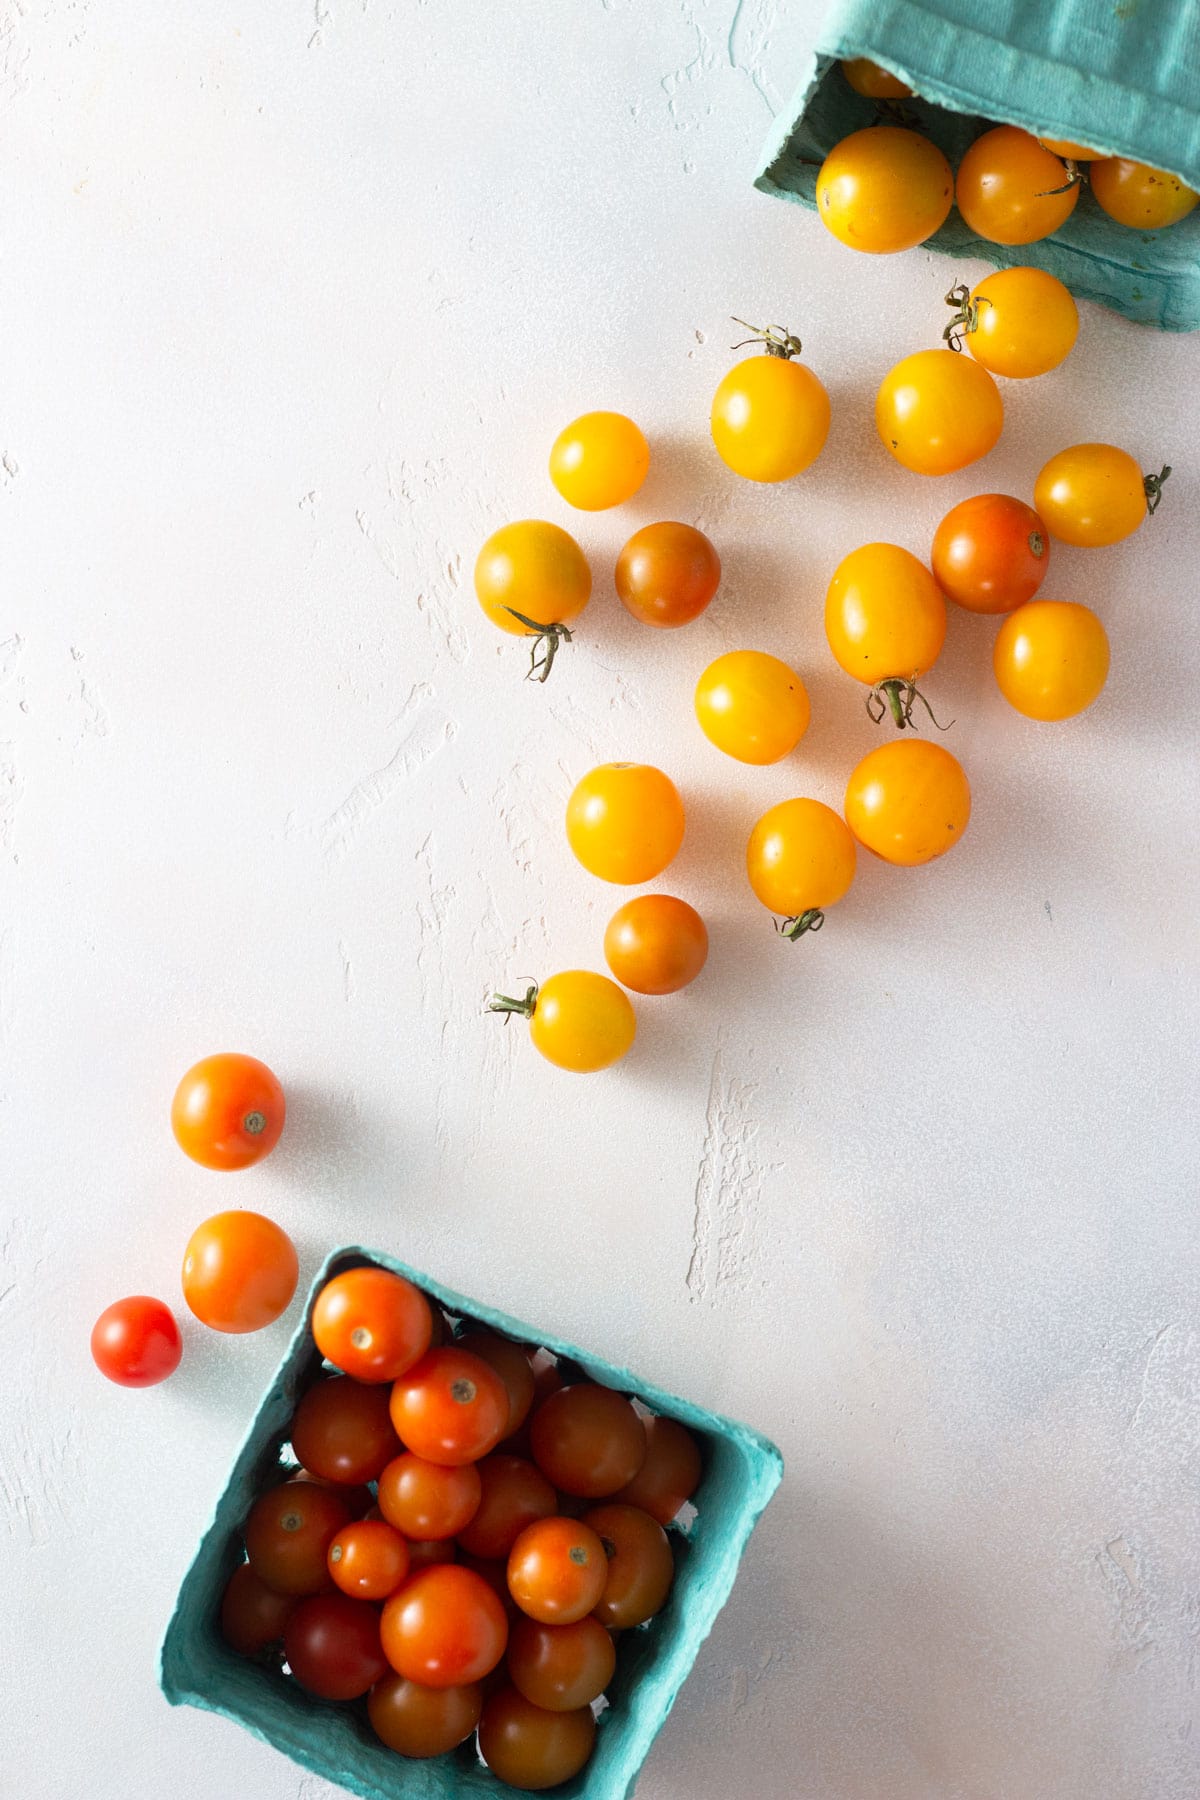 Overhead view of red and yellow grape tomatoes on a light surface.